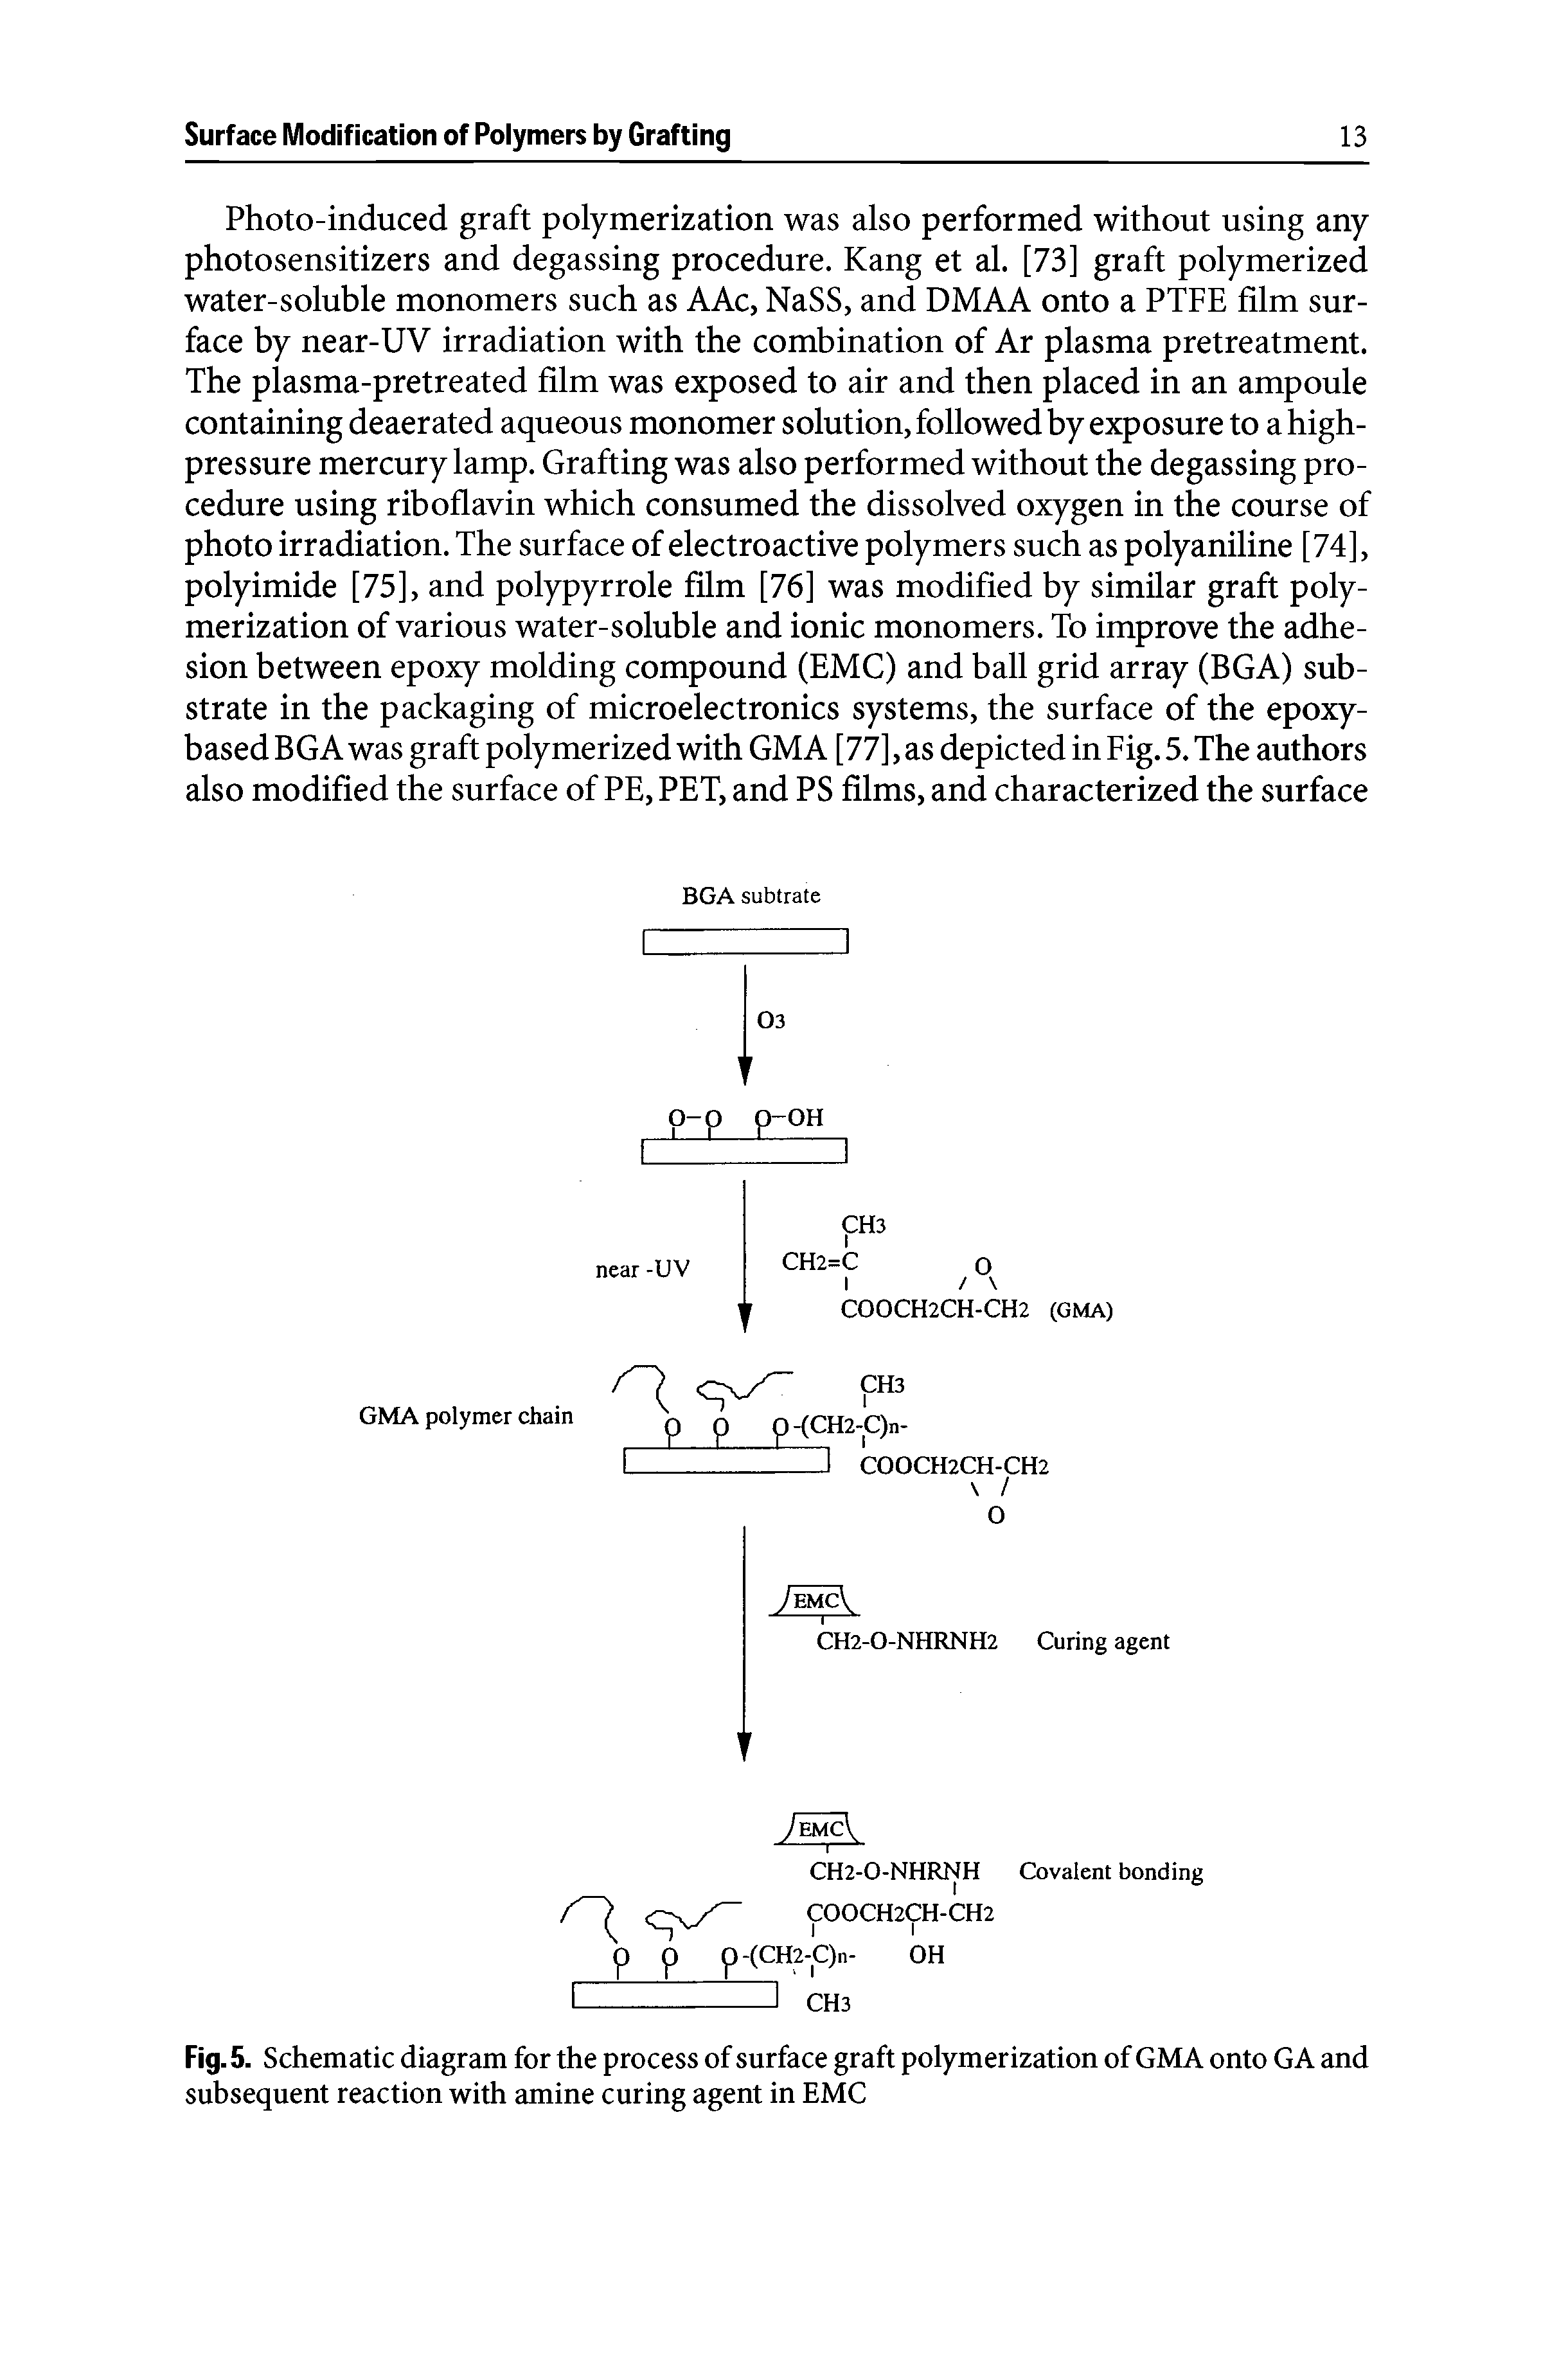 Fig. 5. Schematic diagram for the process of surface graft polymerization of GMA onto GA and subsequent reaction with amine curing agent in EMC...